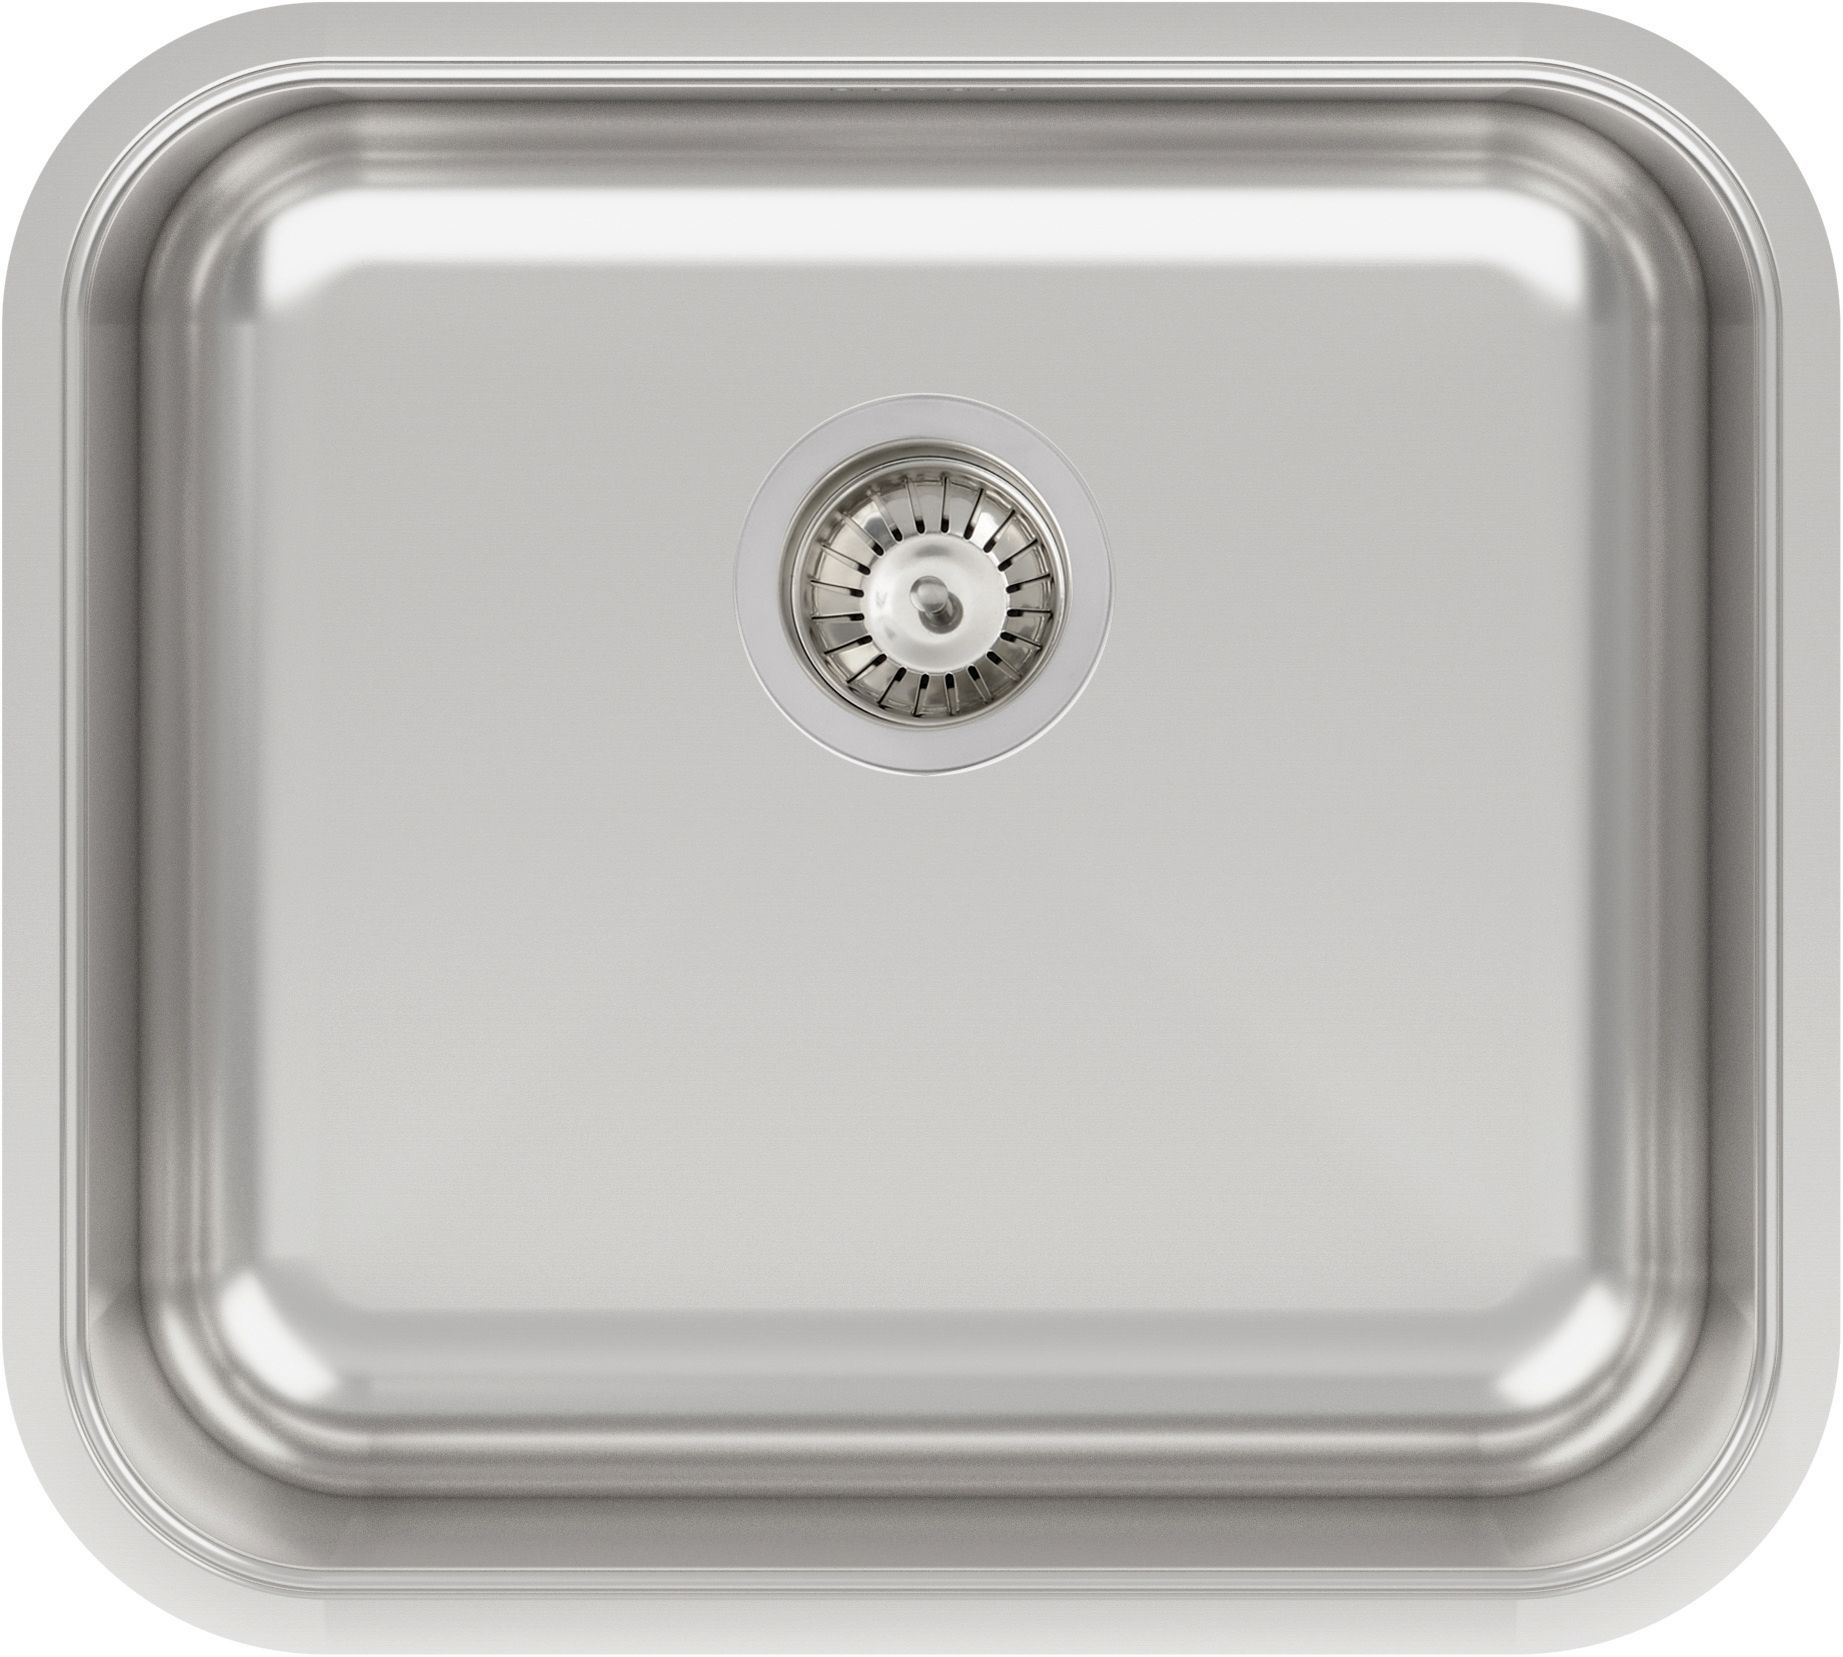 Image of Abode Melbourne 1 Bowl Kitchen Sink - Stainless Steel